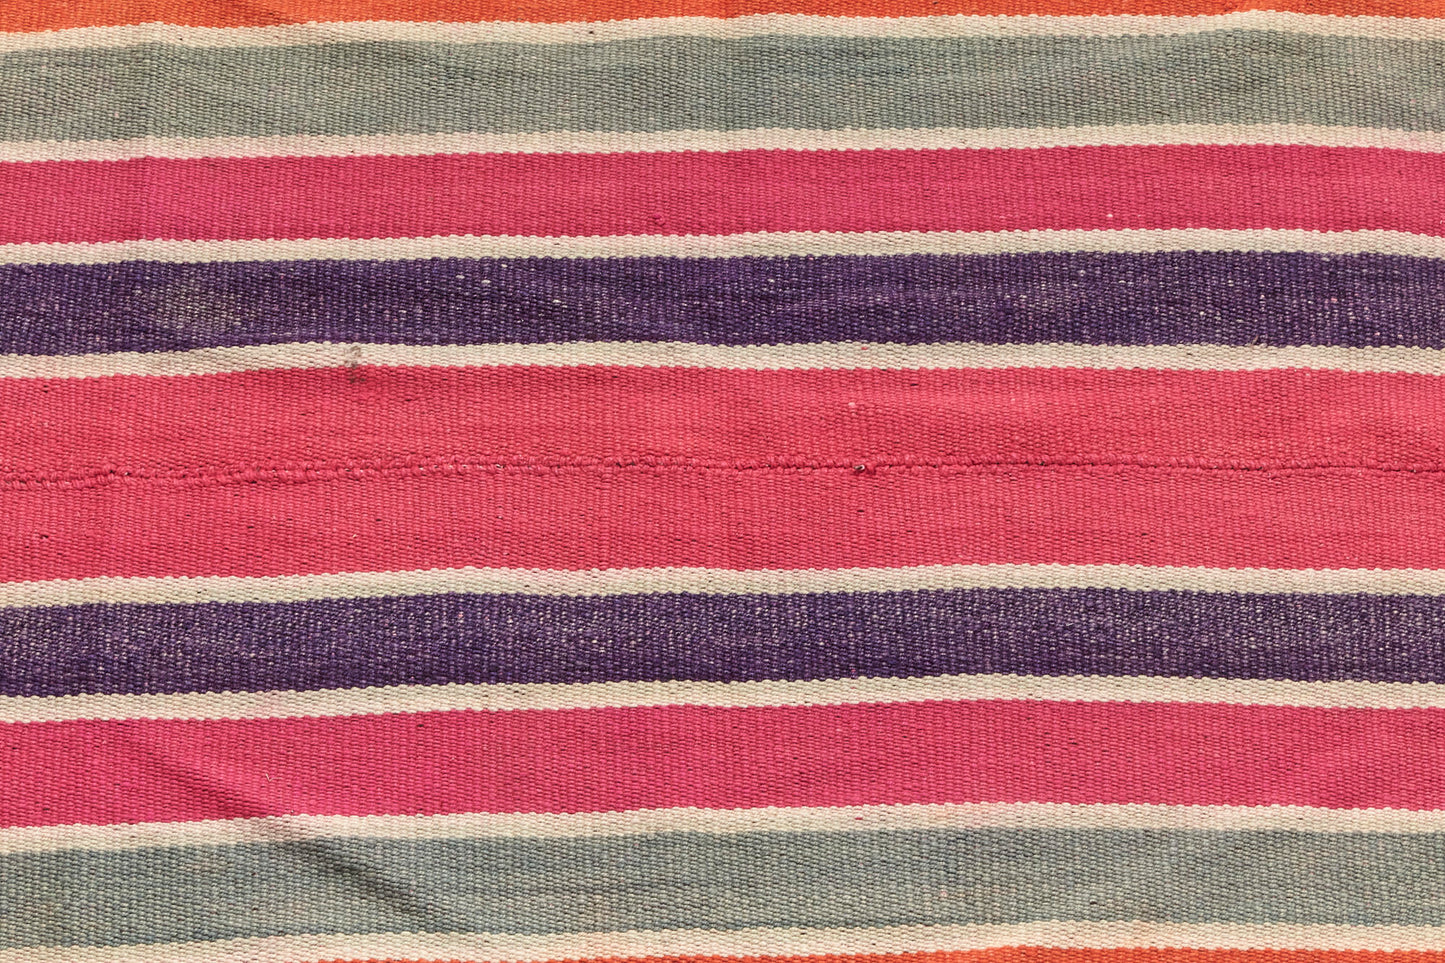 Guatemalan vintage rug with vibrant red, pink, purple and cream stripes, would be perfect for a bedroom, nursery or living room rug - Available from King Kennedy Rugs Los Angeles 